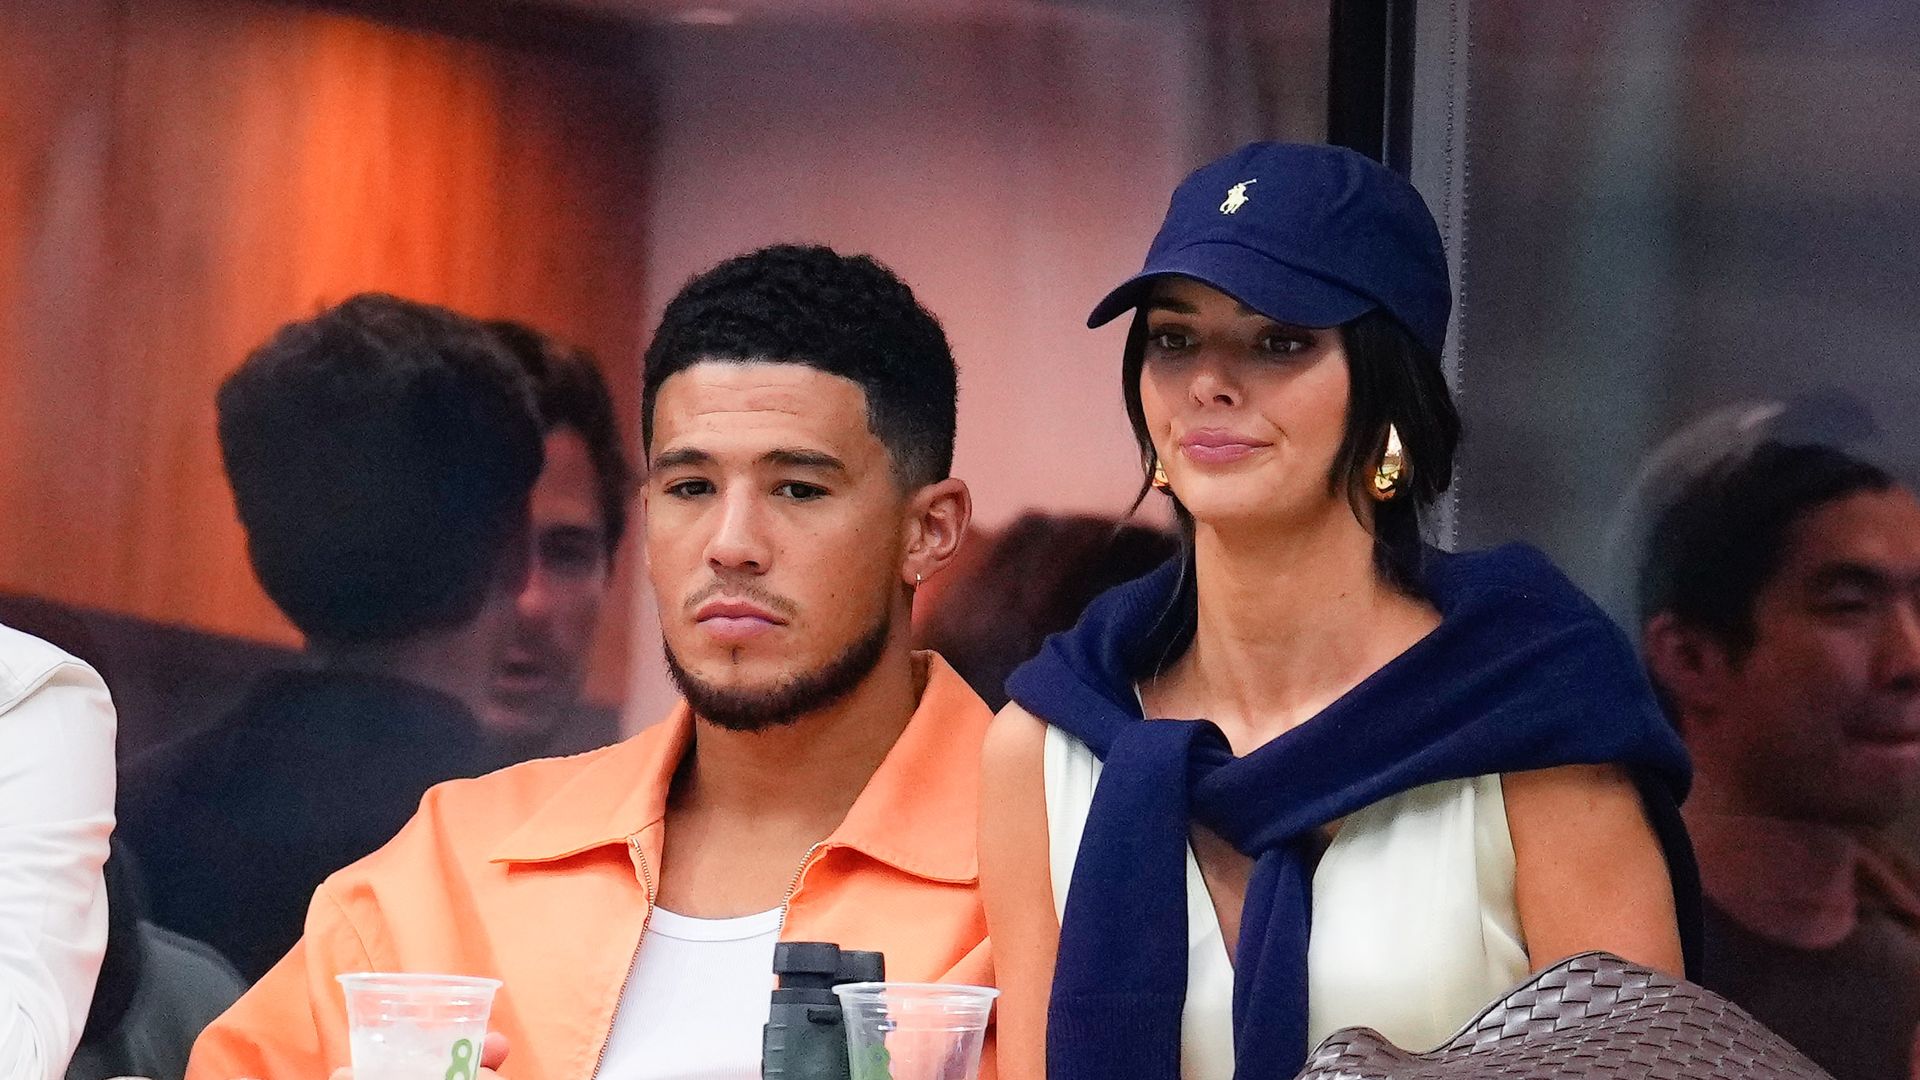 Devin Booker and Kendall Jenner attend the 2022 US Open Championship match at USTA Billie Jean King National Tennis Center on September 11, 2022, in the Flushing neighborhood of the Queens borough of New York City. 